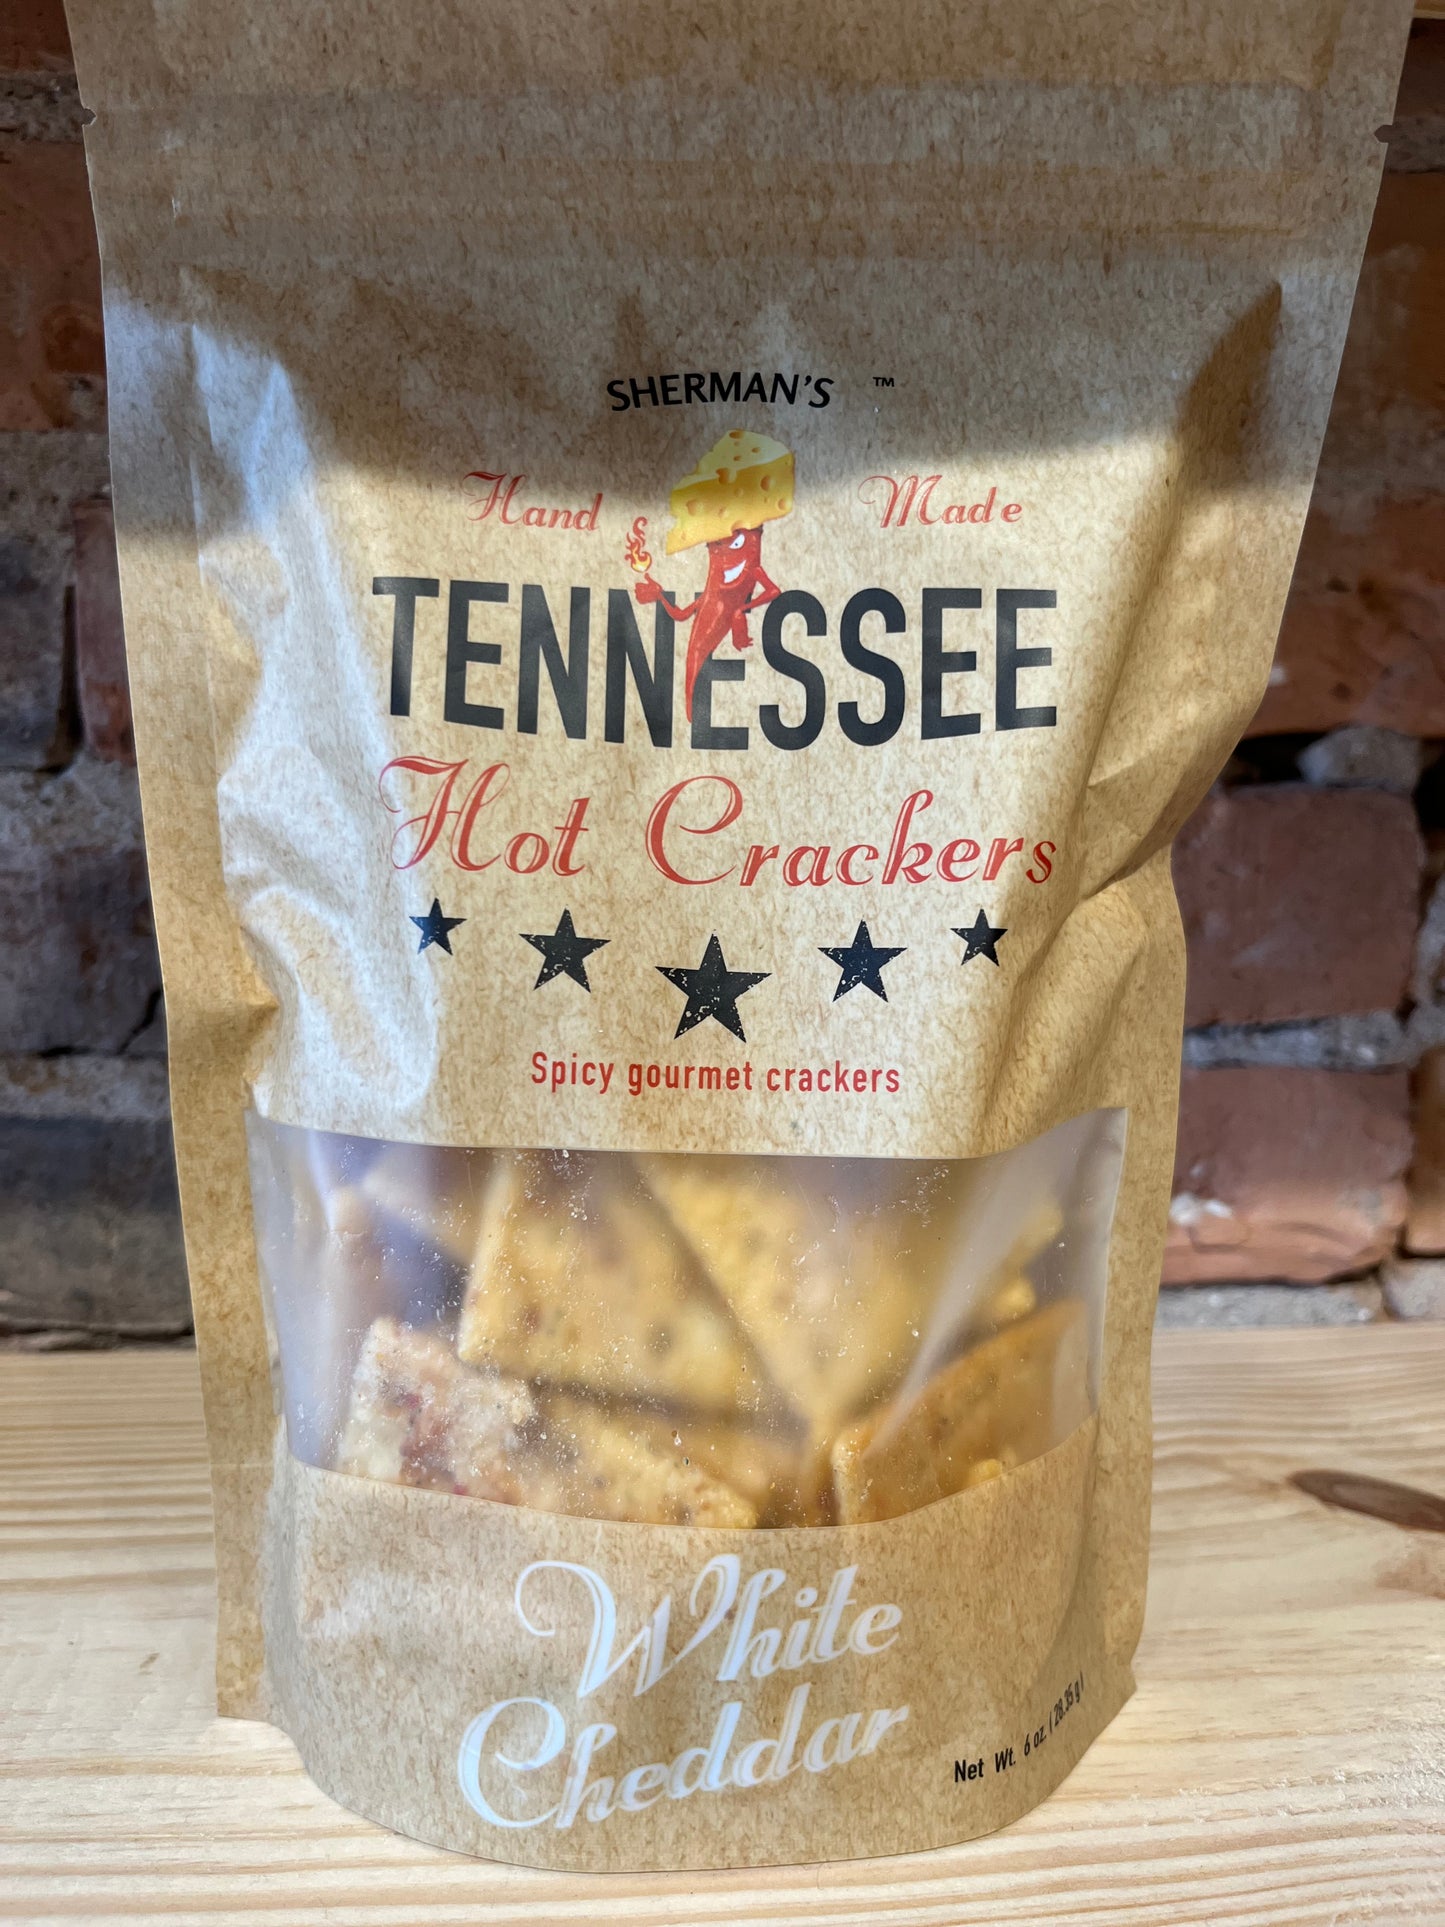 Sherman’s Tennessee Hot Crackers-White Cheddar